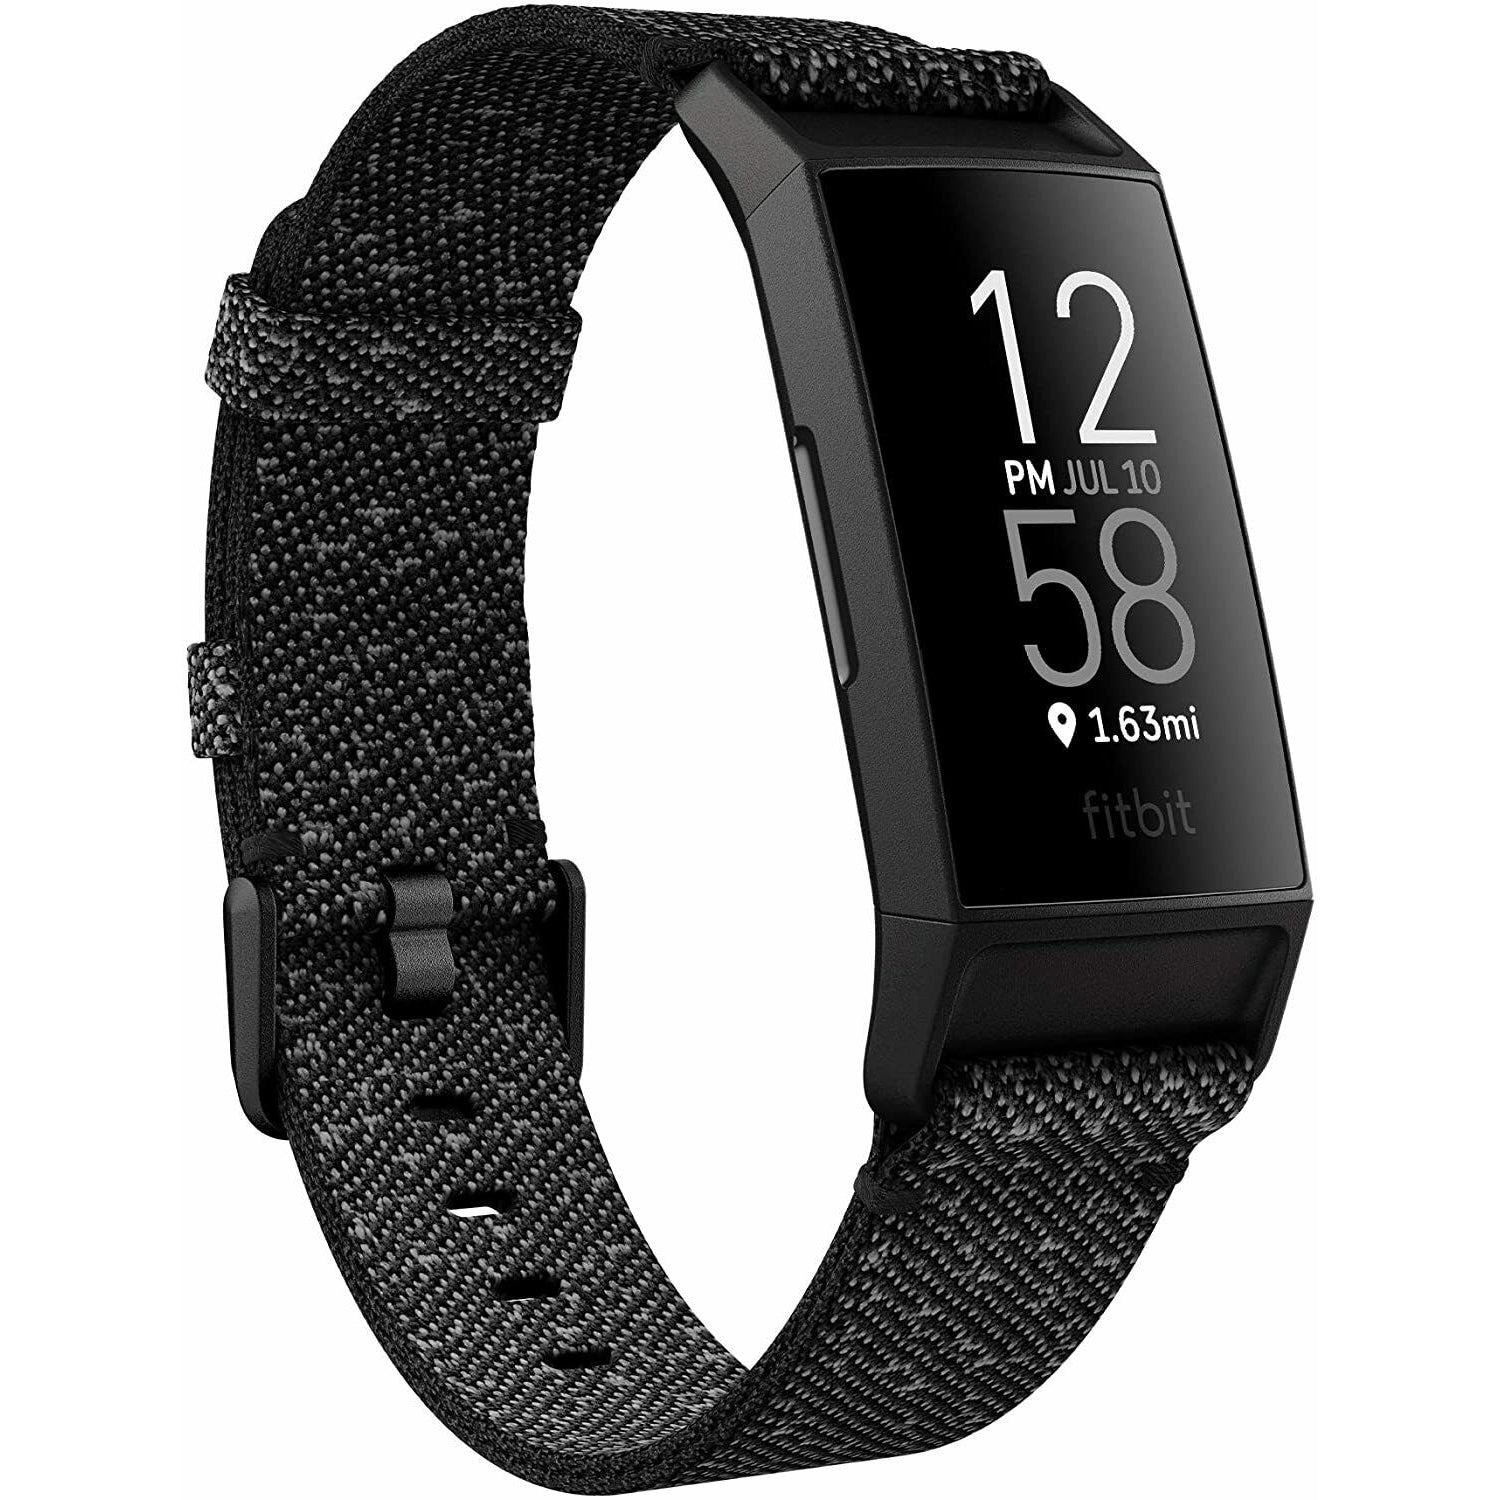 Fitbit Charge 4 Advanced Fitness Tracker with GPS - Granite Woven - Refurbished Excellent